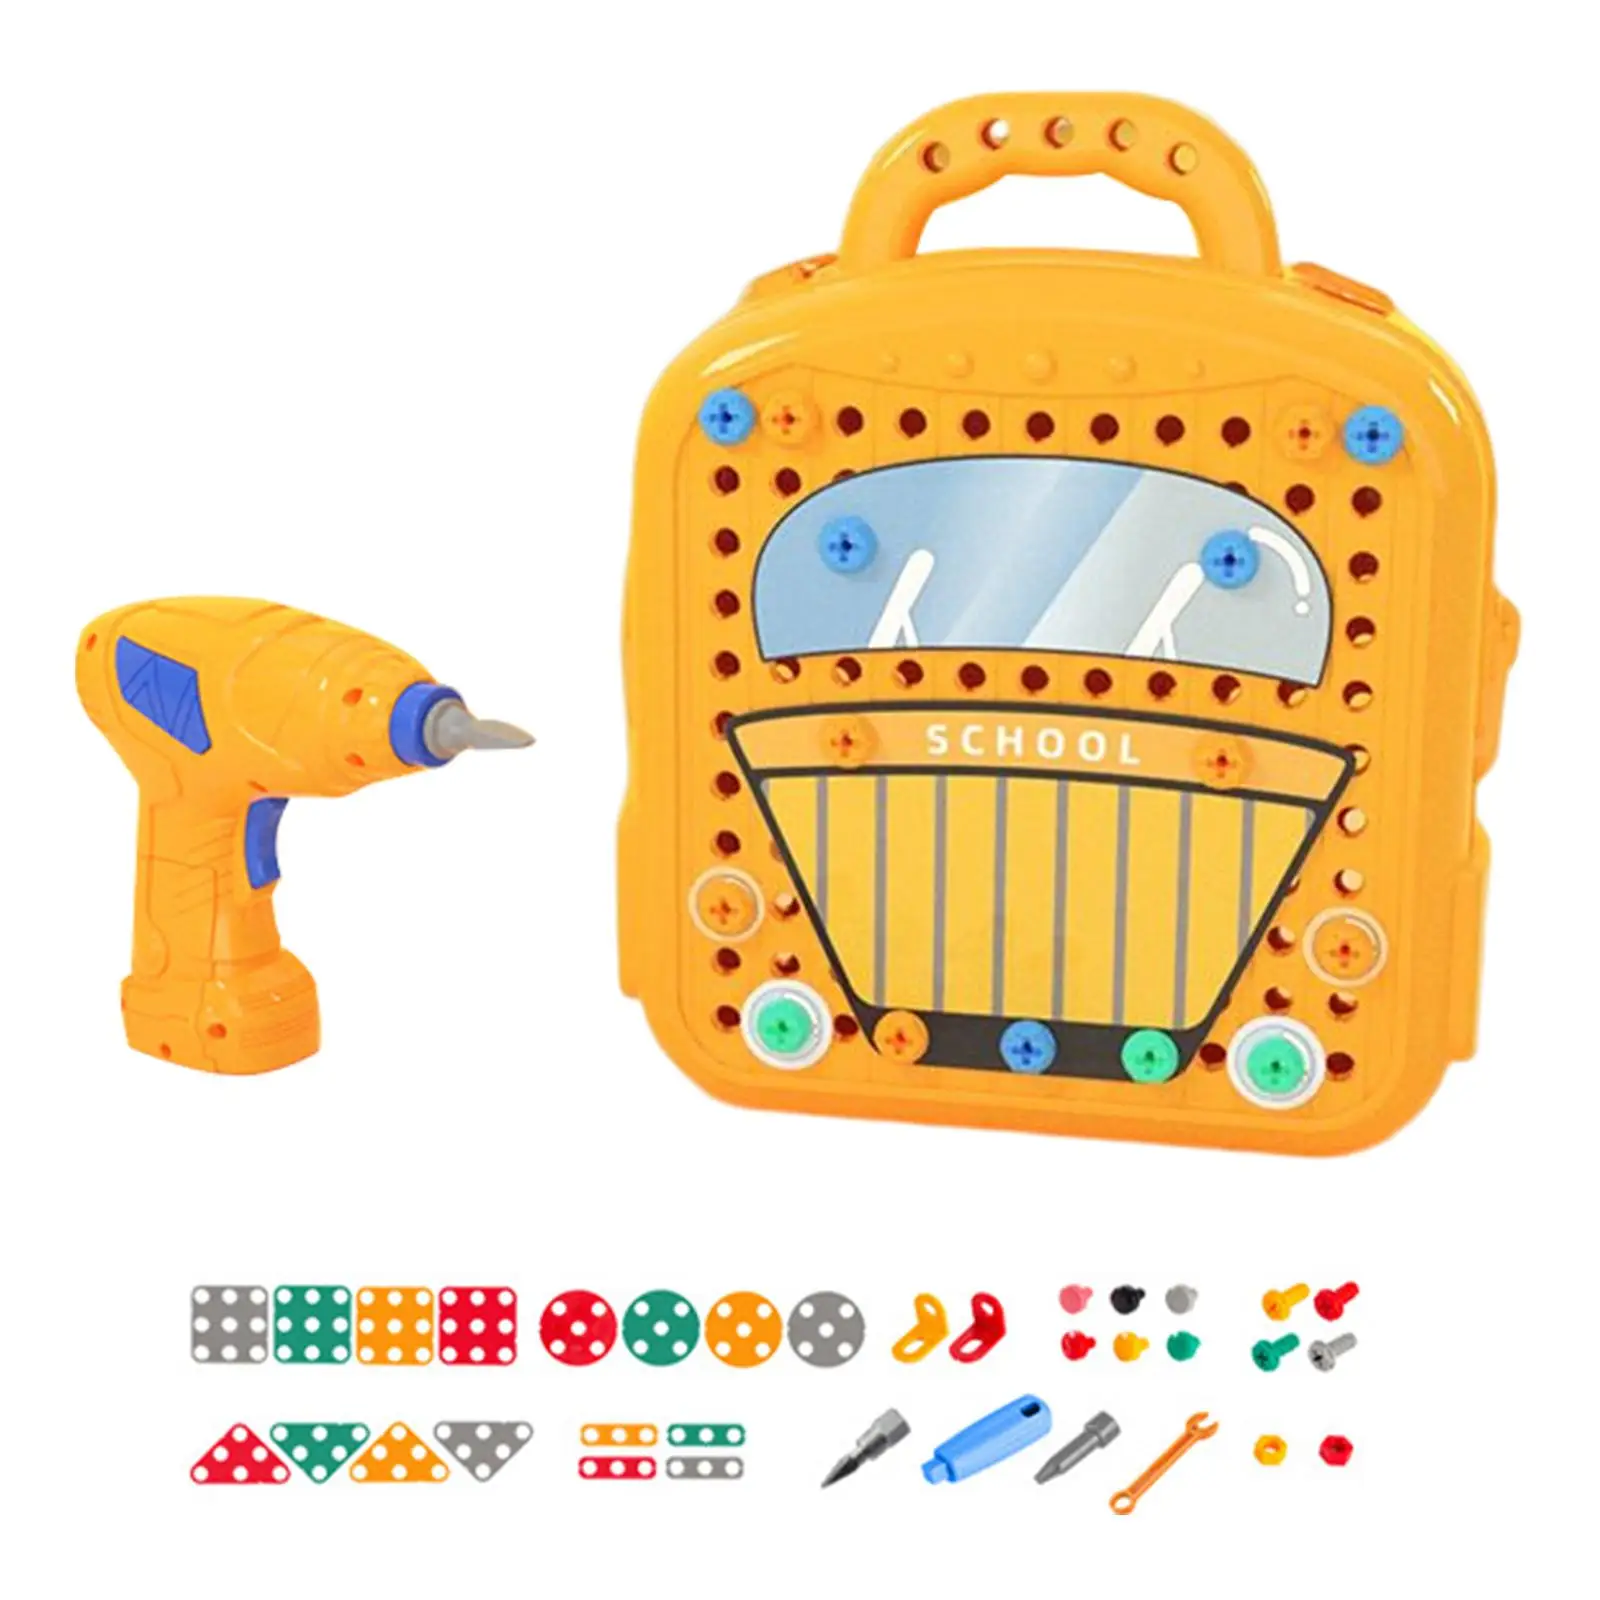 Drill Set Games Activity Center DIY Drill Puzzle Engineering Building Blocks Learning Kit for 3 4 5 6 7 Kids Gifts